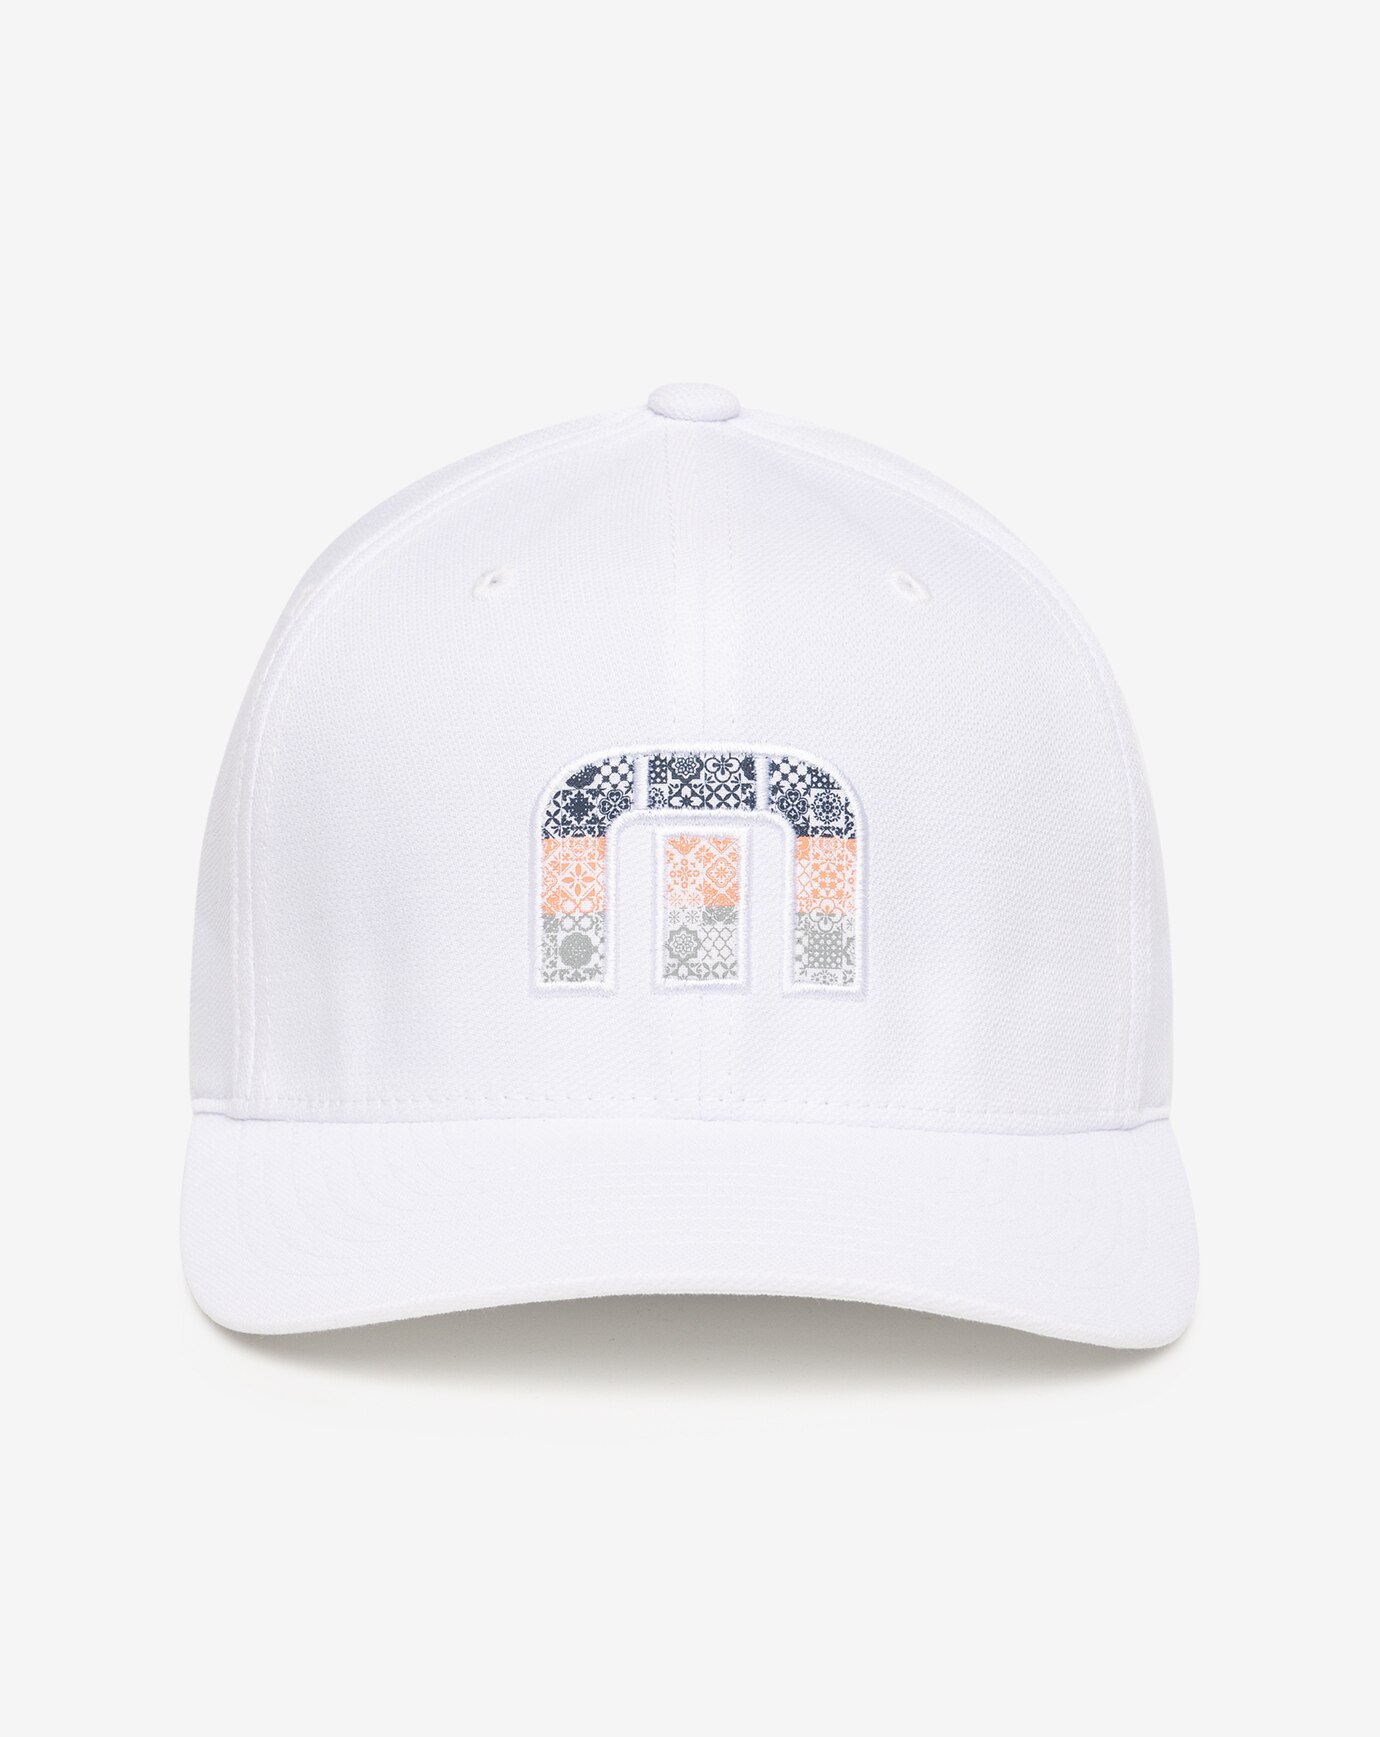 SWIM WITH DOLPHINS YOUTH HAT 1